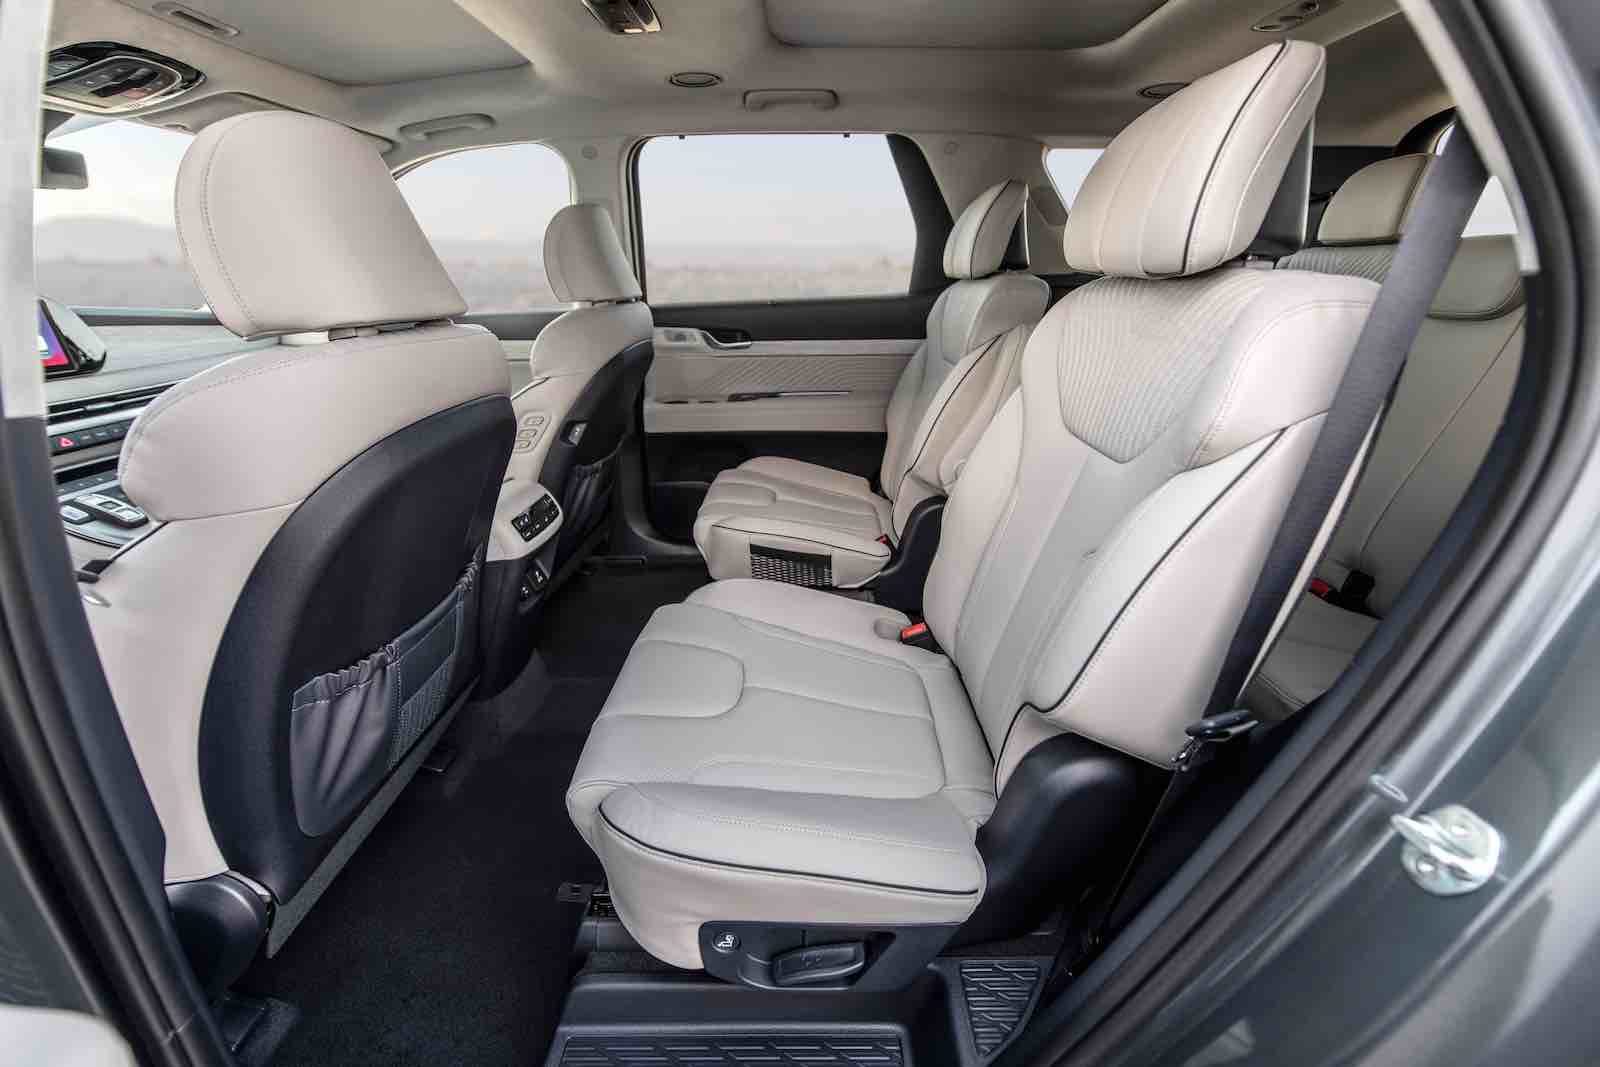 The Three Rows Hyundai Palisade Top Trim Calligraphy is More Luxury and